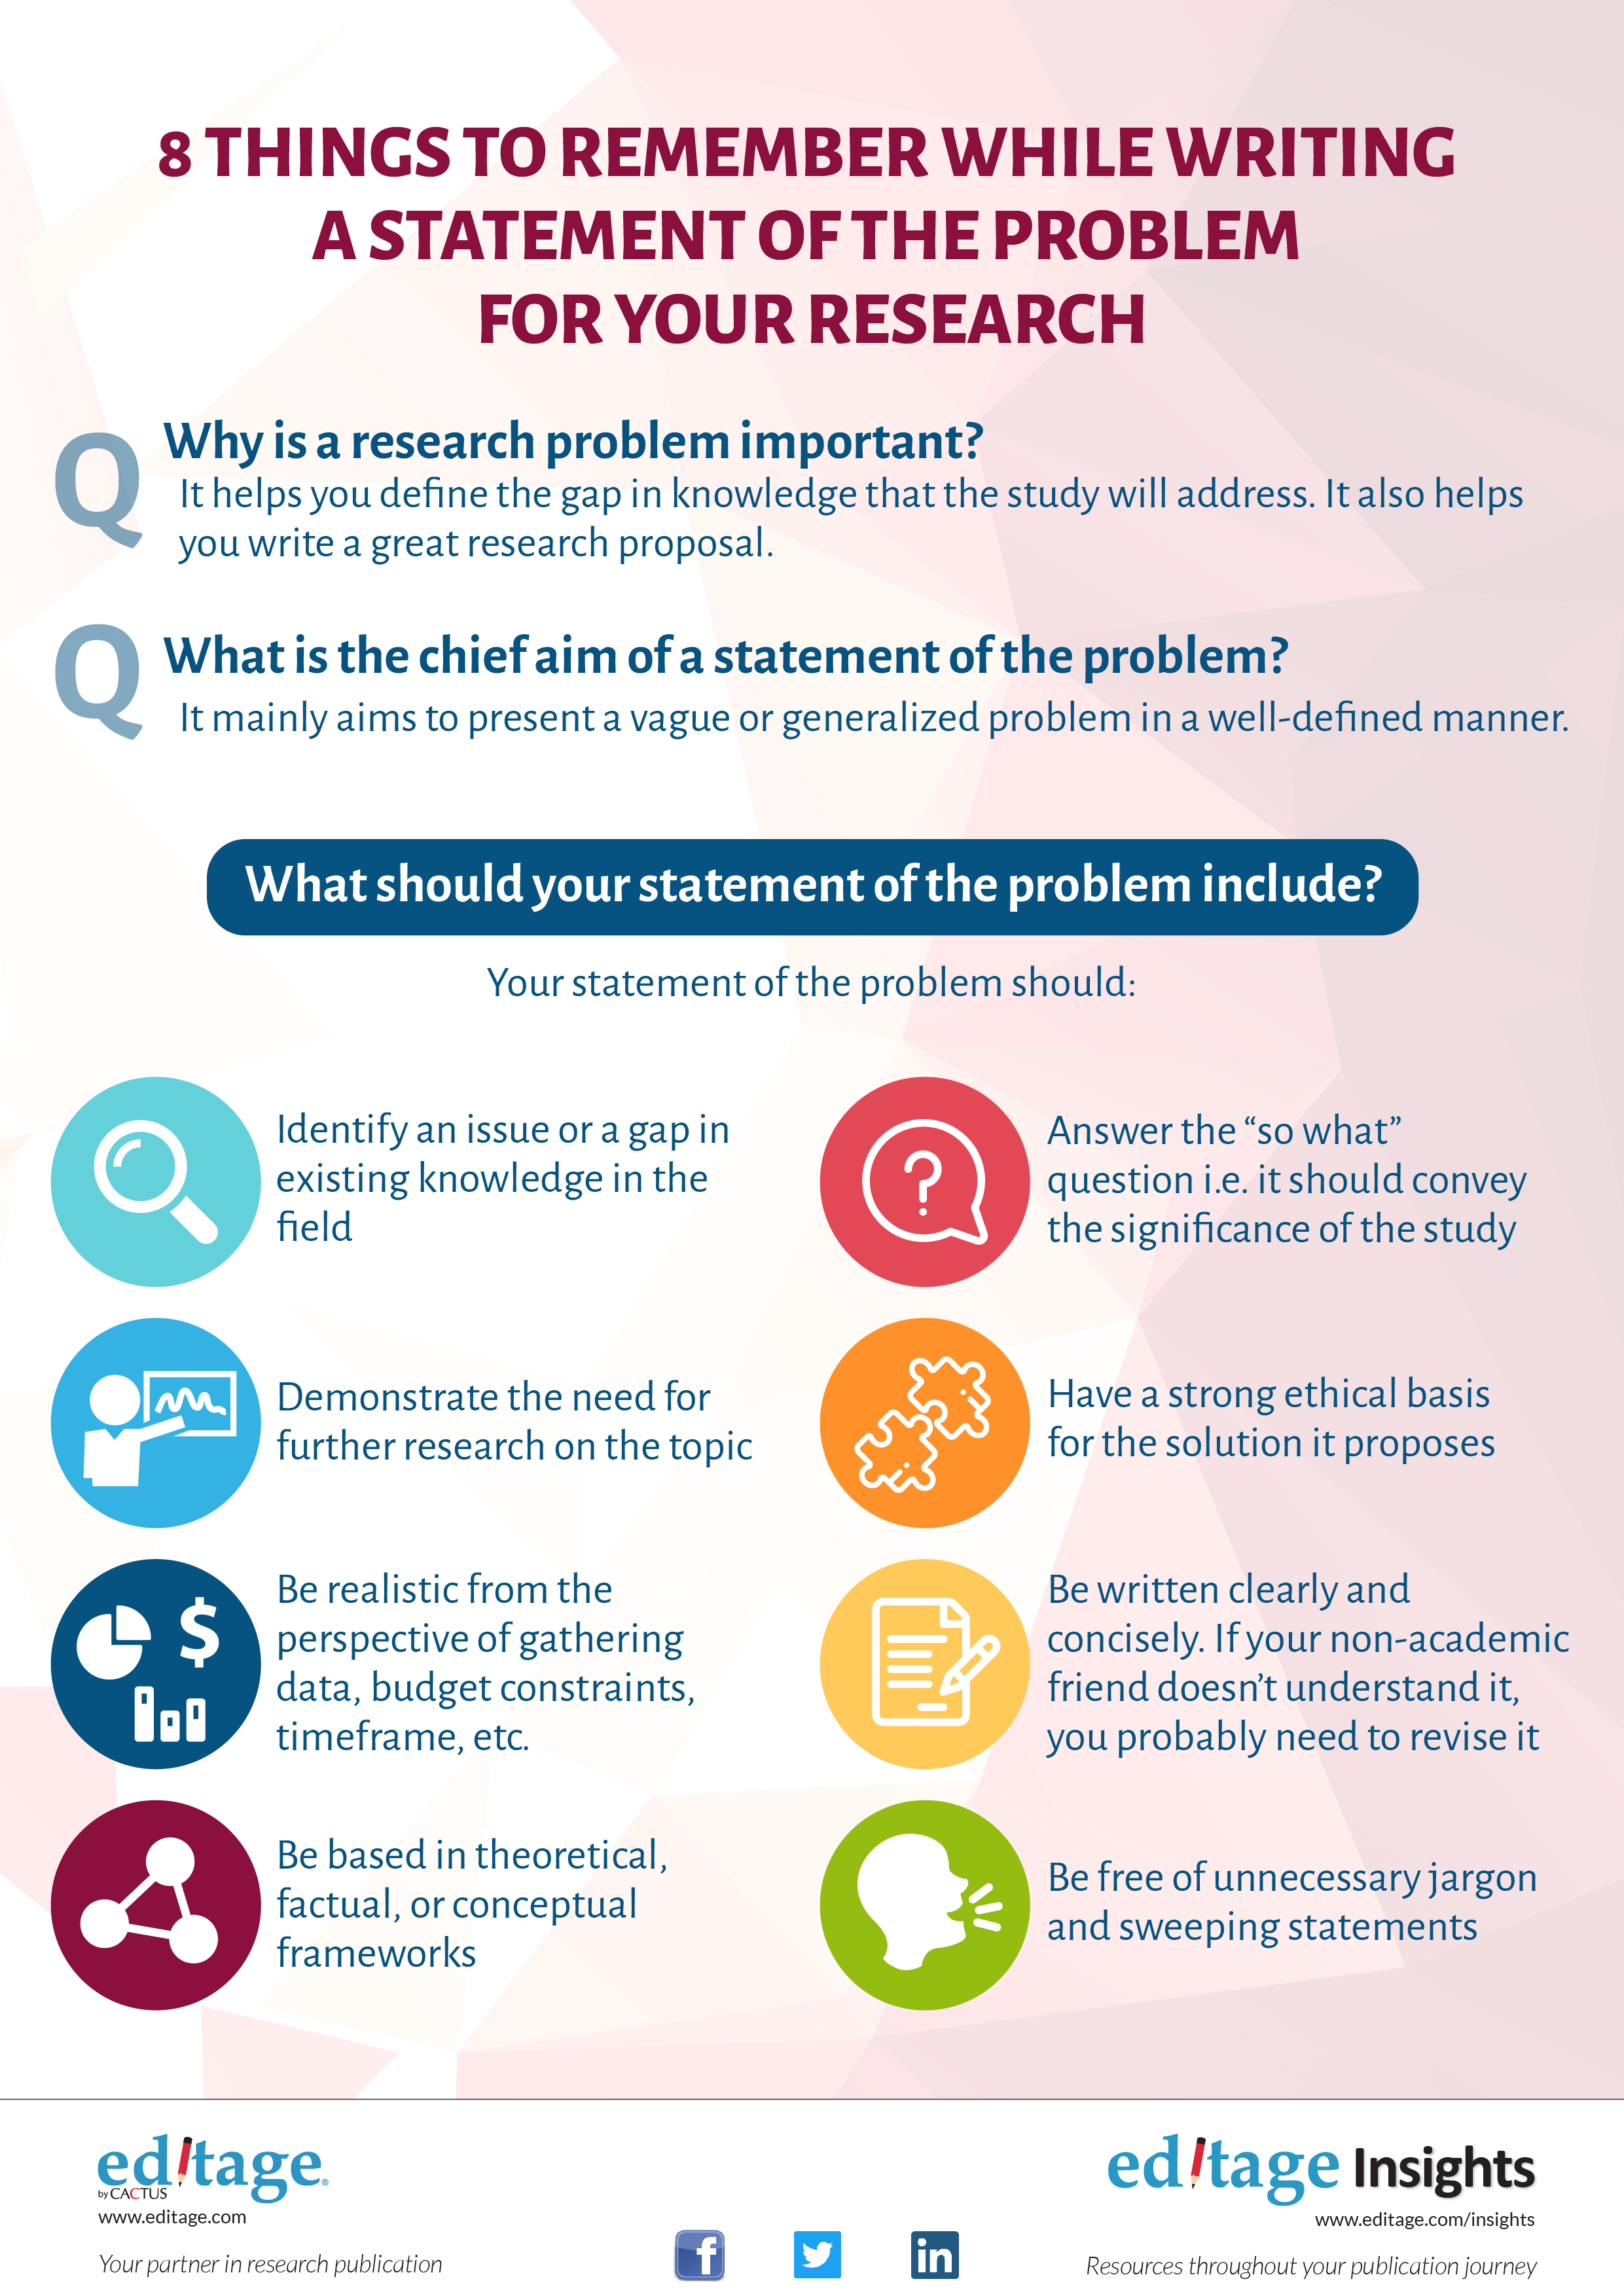 8 things to remember while writing a statement of the problem